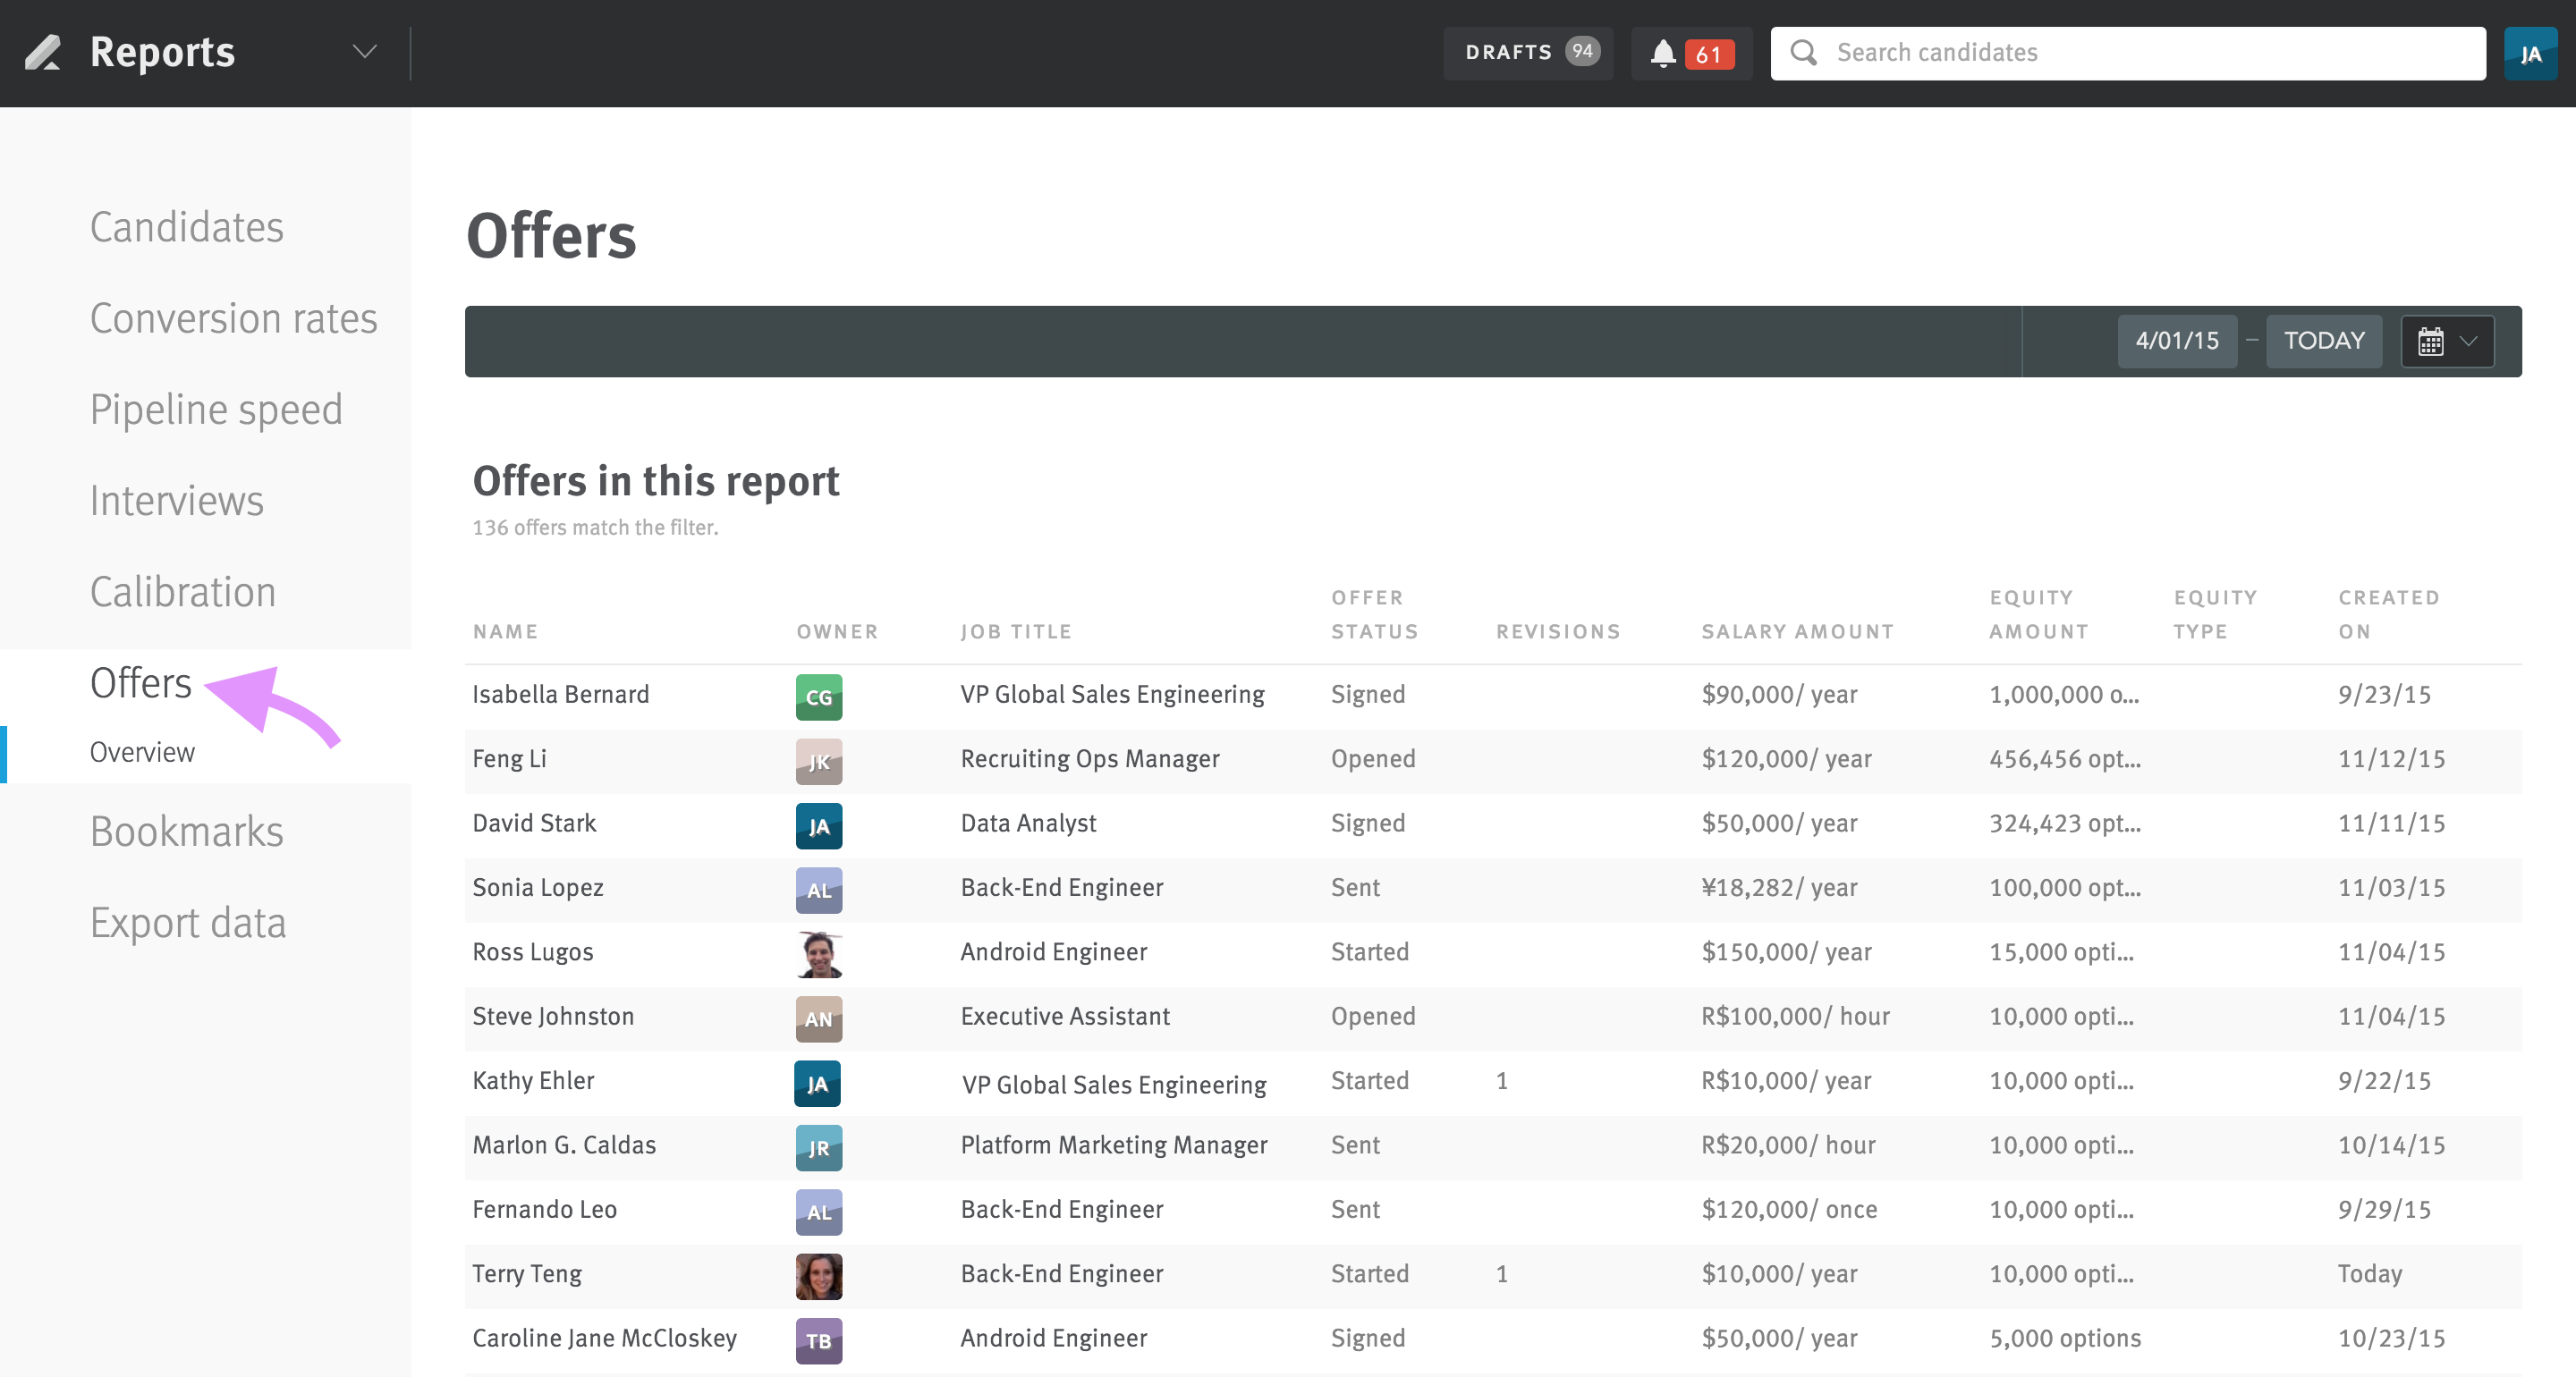 Legacy Offers report with arrow pointing to 'Offers' in report menu